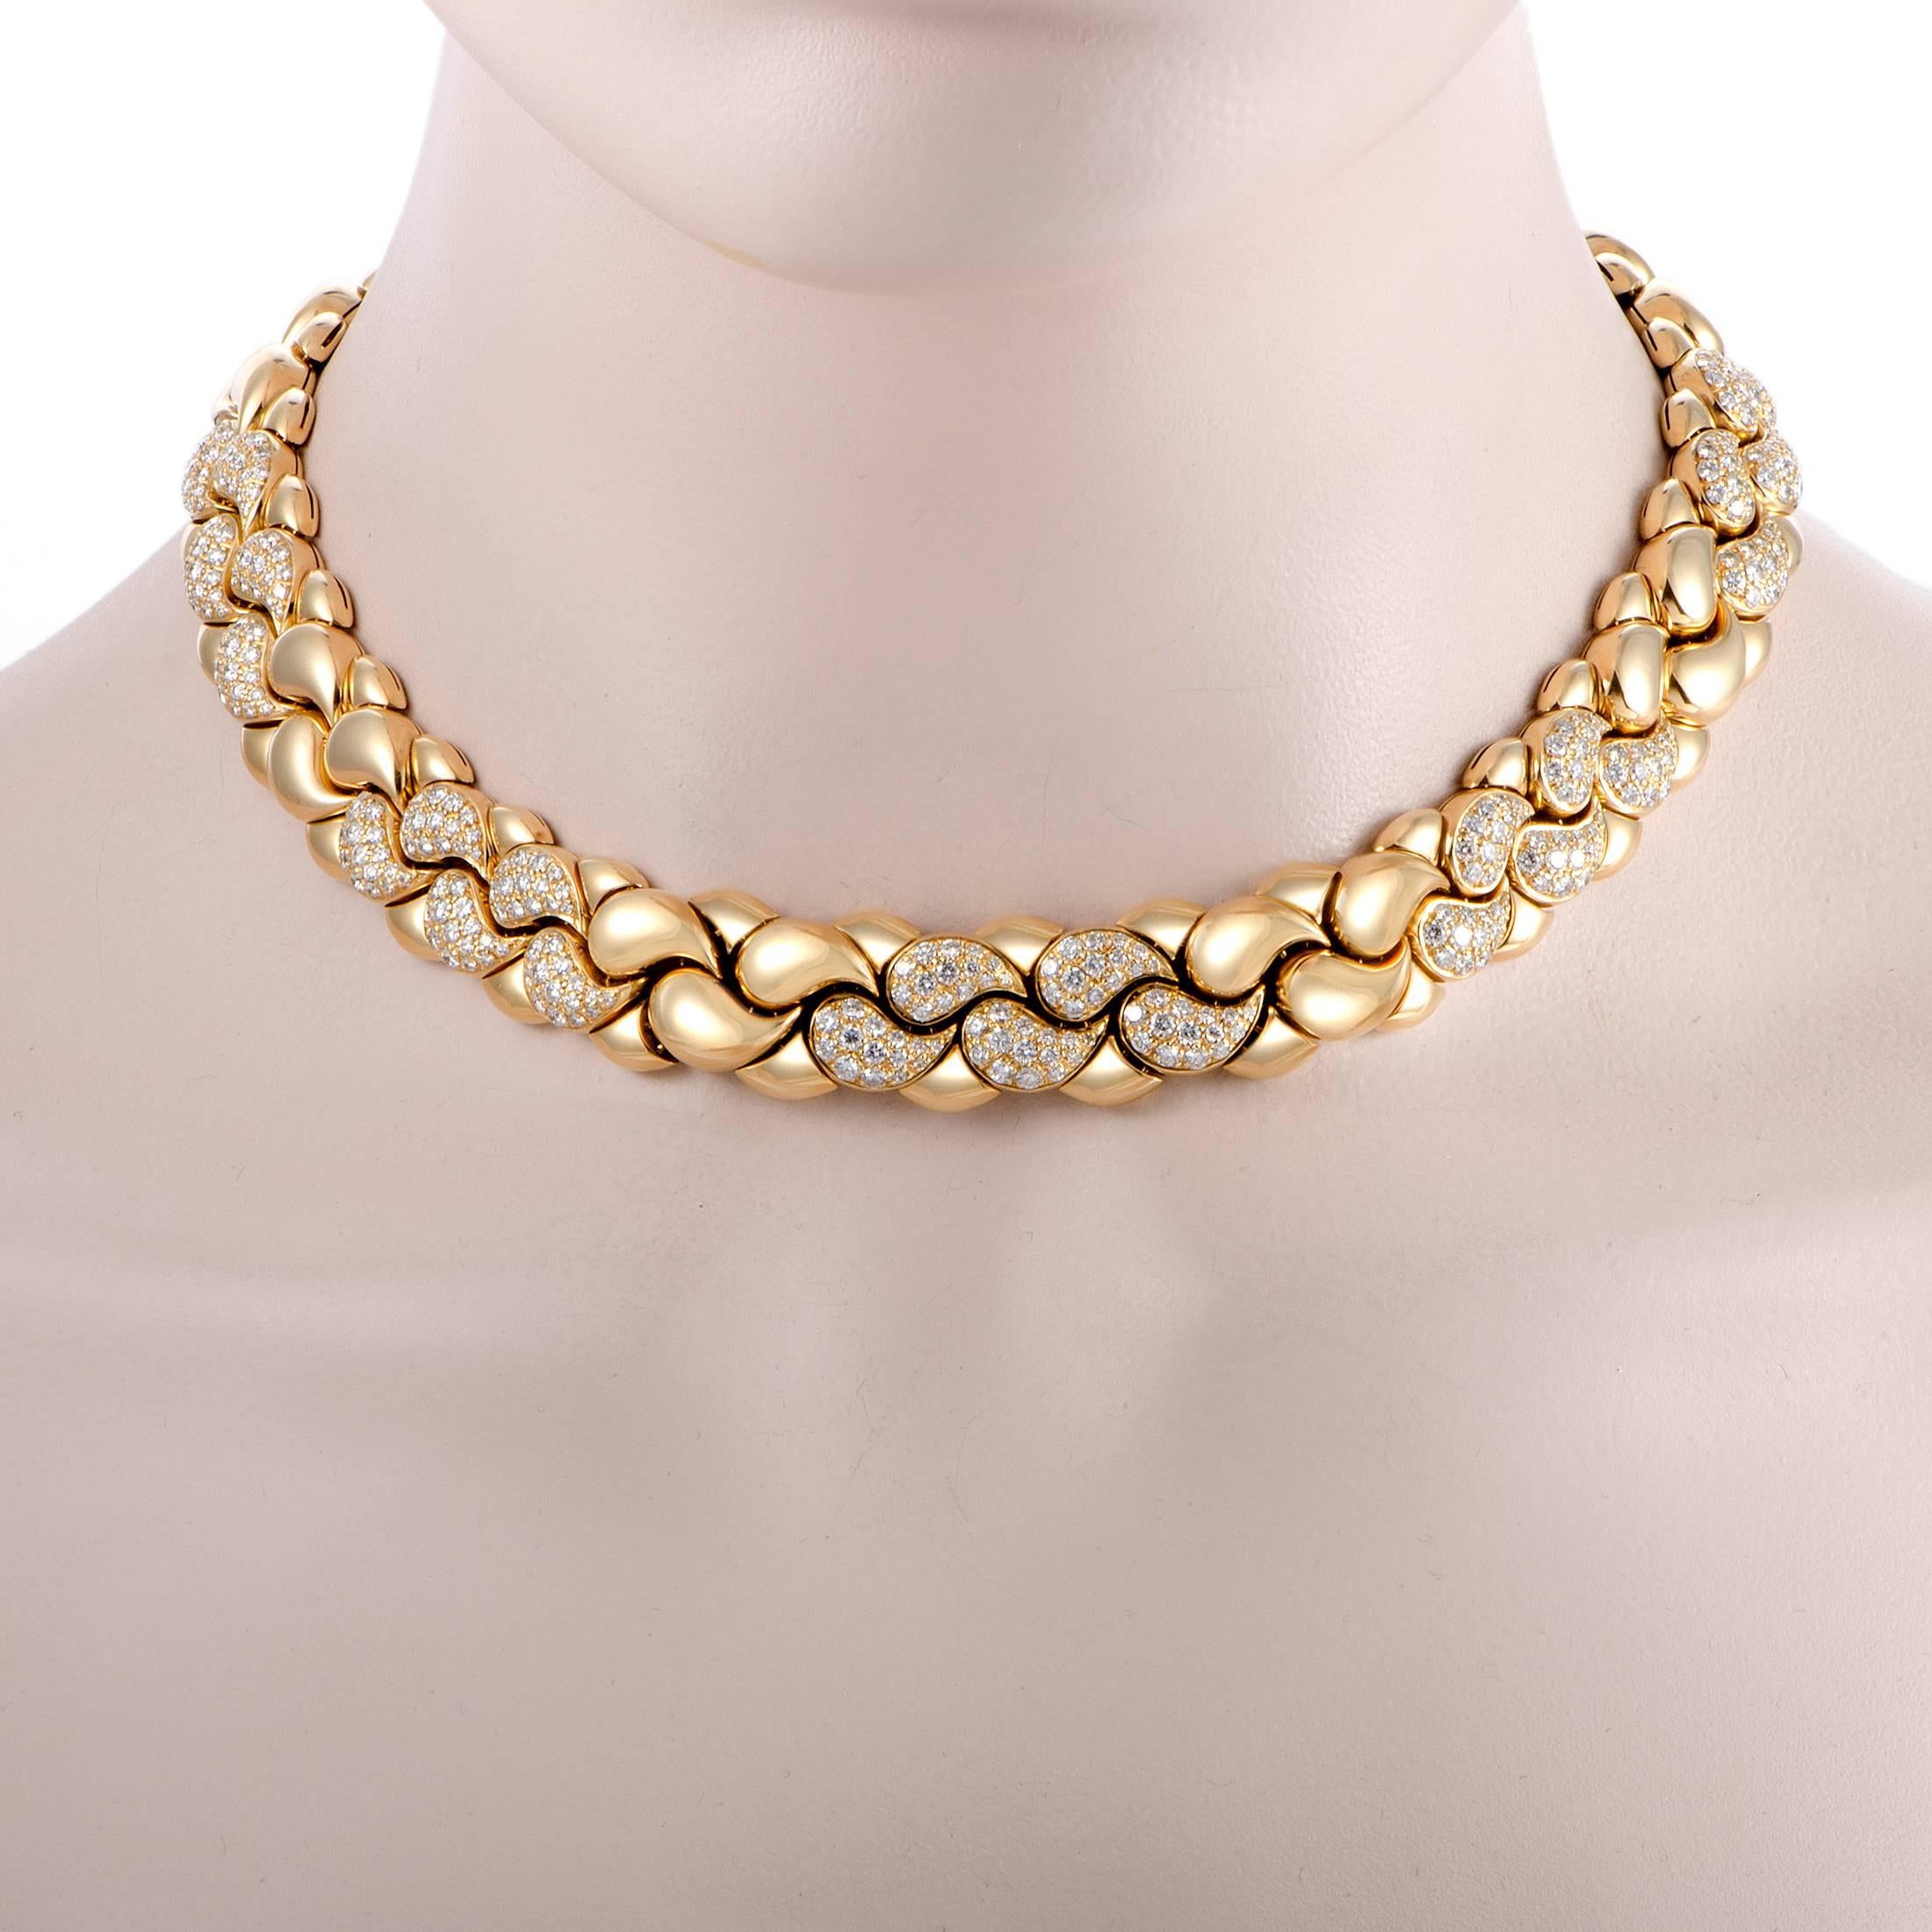 Presented within the “Casmir” collection by Chopard, this stunning necklace boasts an incredibly bold, fashionable appearance. It is made of radiant 18K yellow gold and embellished with glamorous diamonds that total approximately 7.75